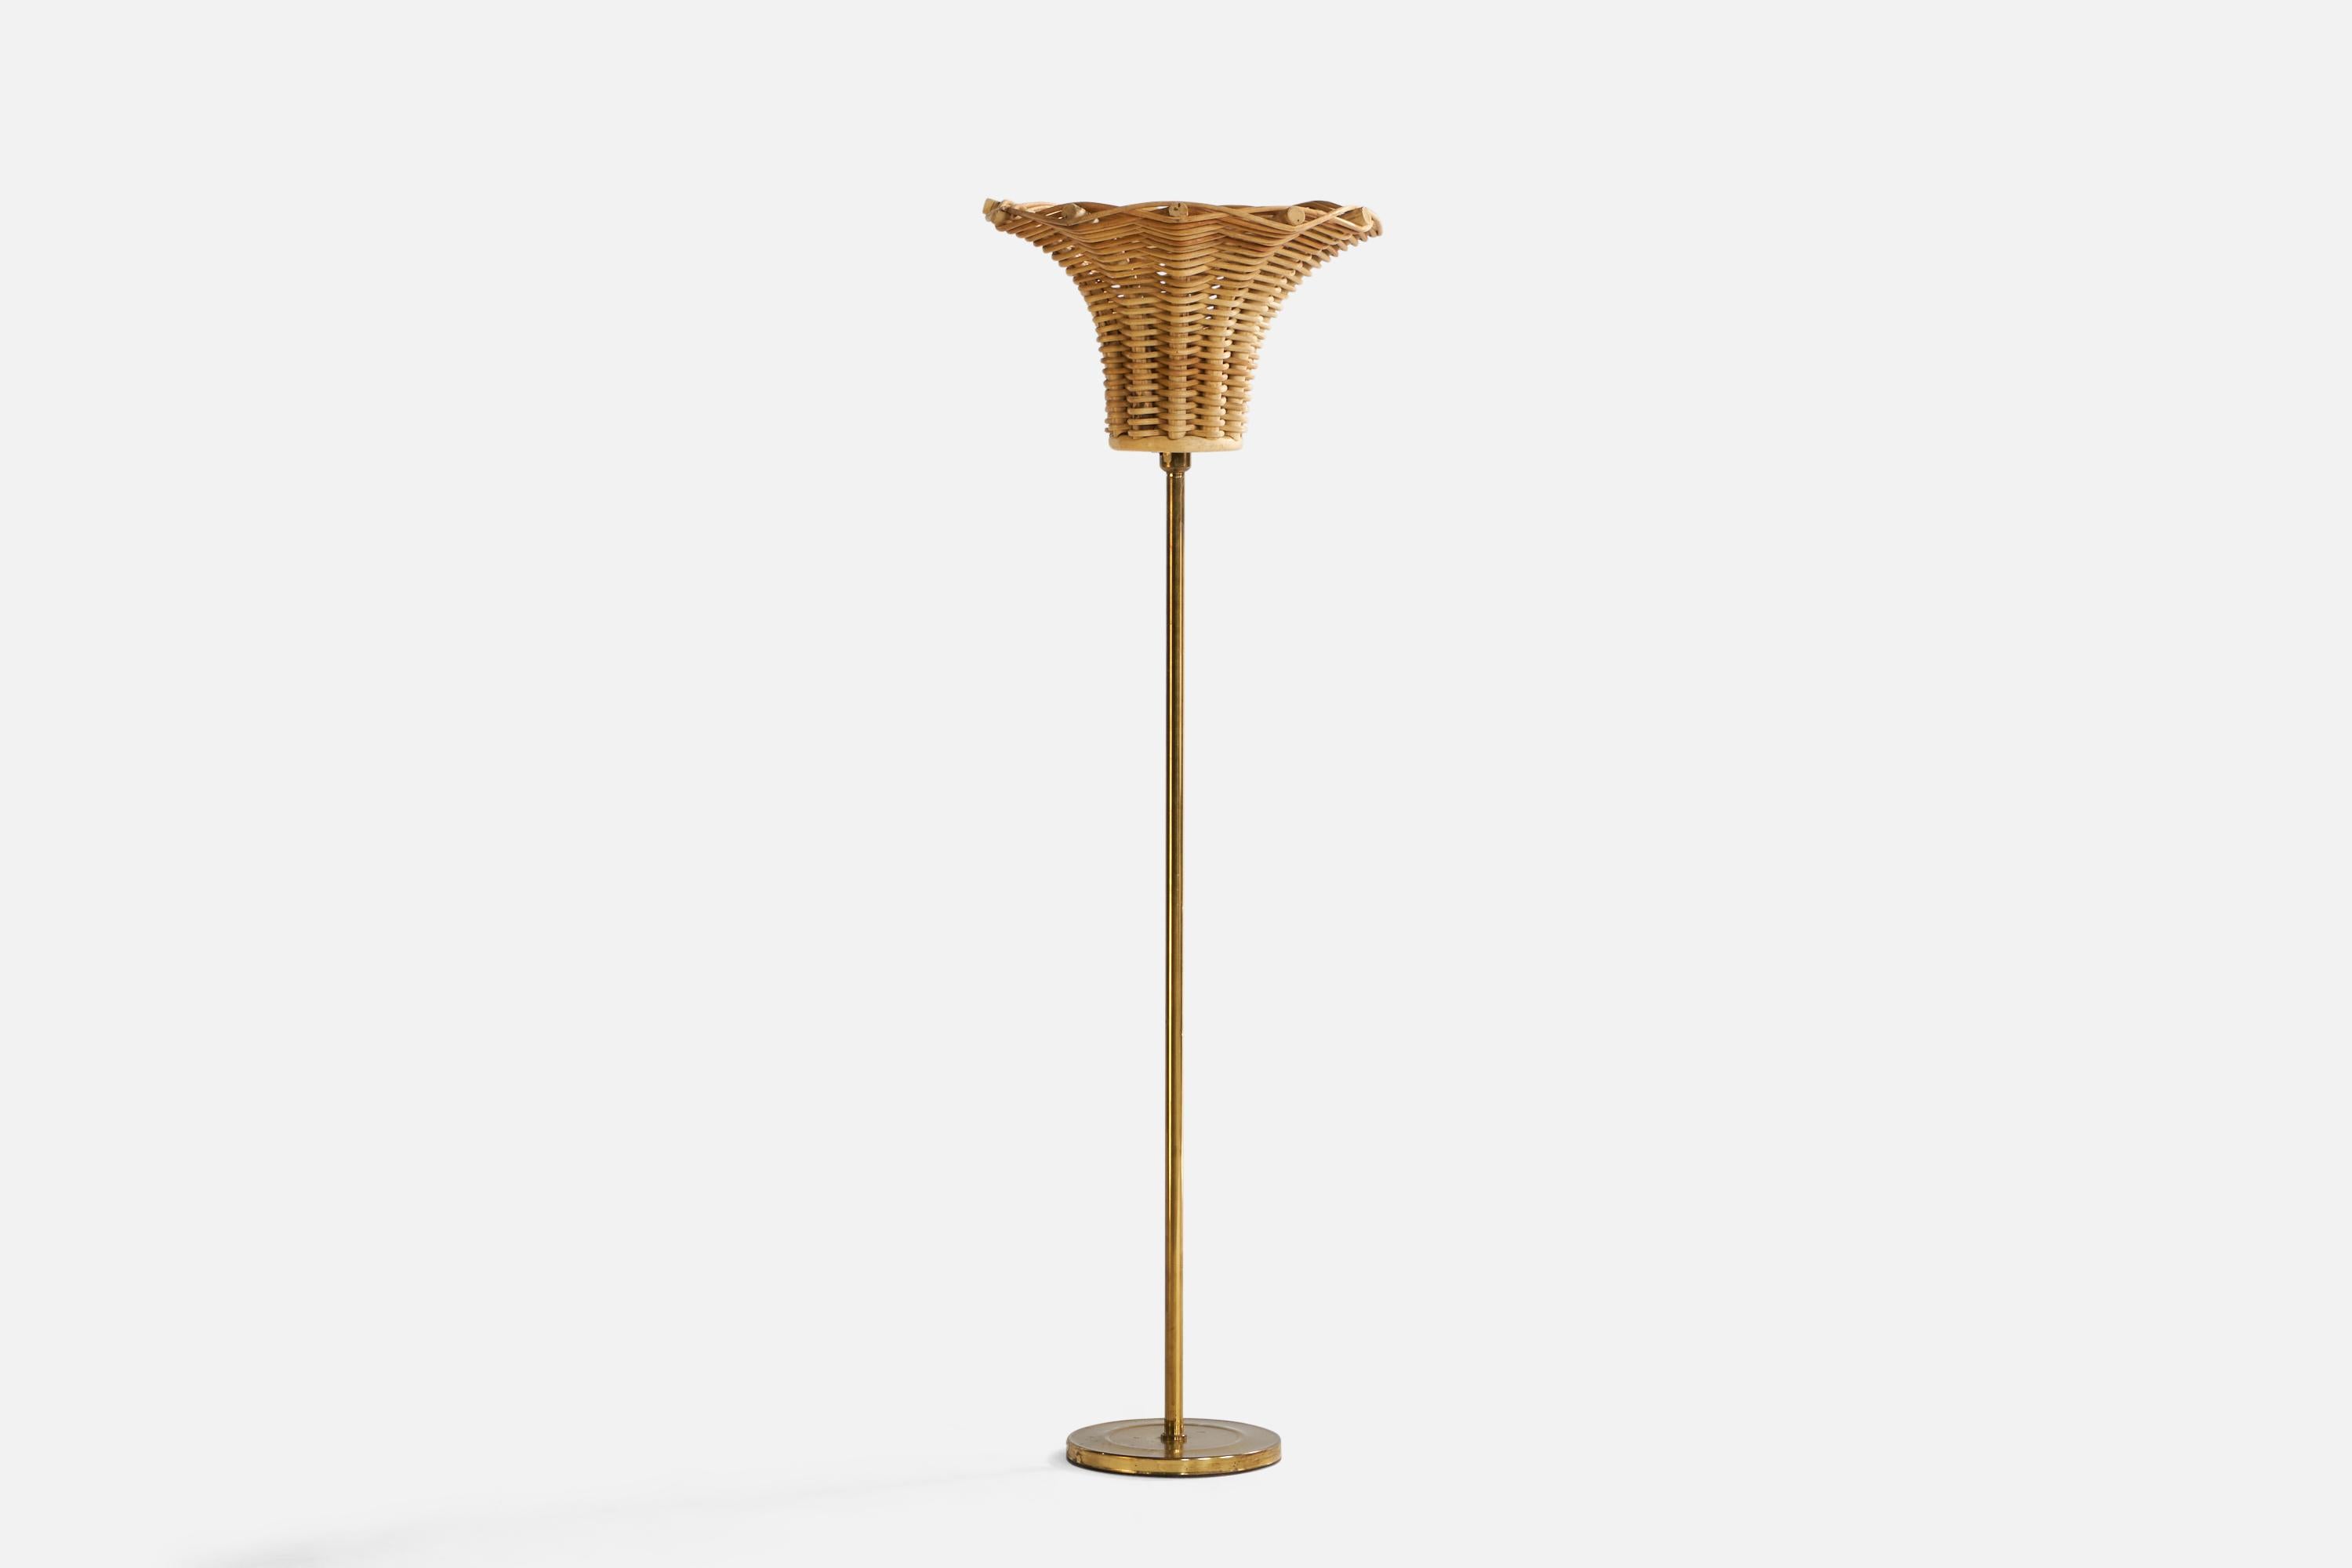 A brass, bamboo and rattan floor lamp designed and produced in Sweden, c. 1960s.

Overall Dimensions (inches): 57” H x 18” Diameter. Stated dimensions include shade.
Bulb Specifications: E-26 Bulb
Number of Sockets: 1
All lighting will be converted